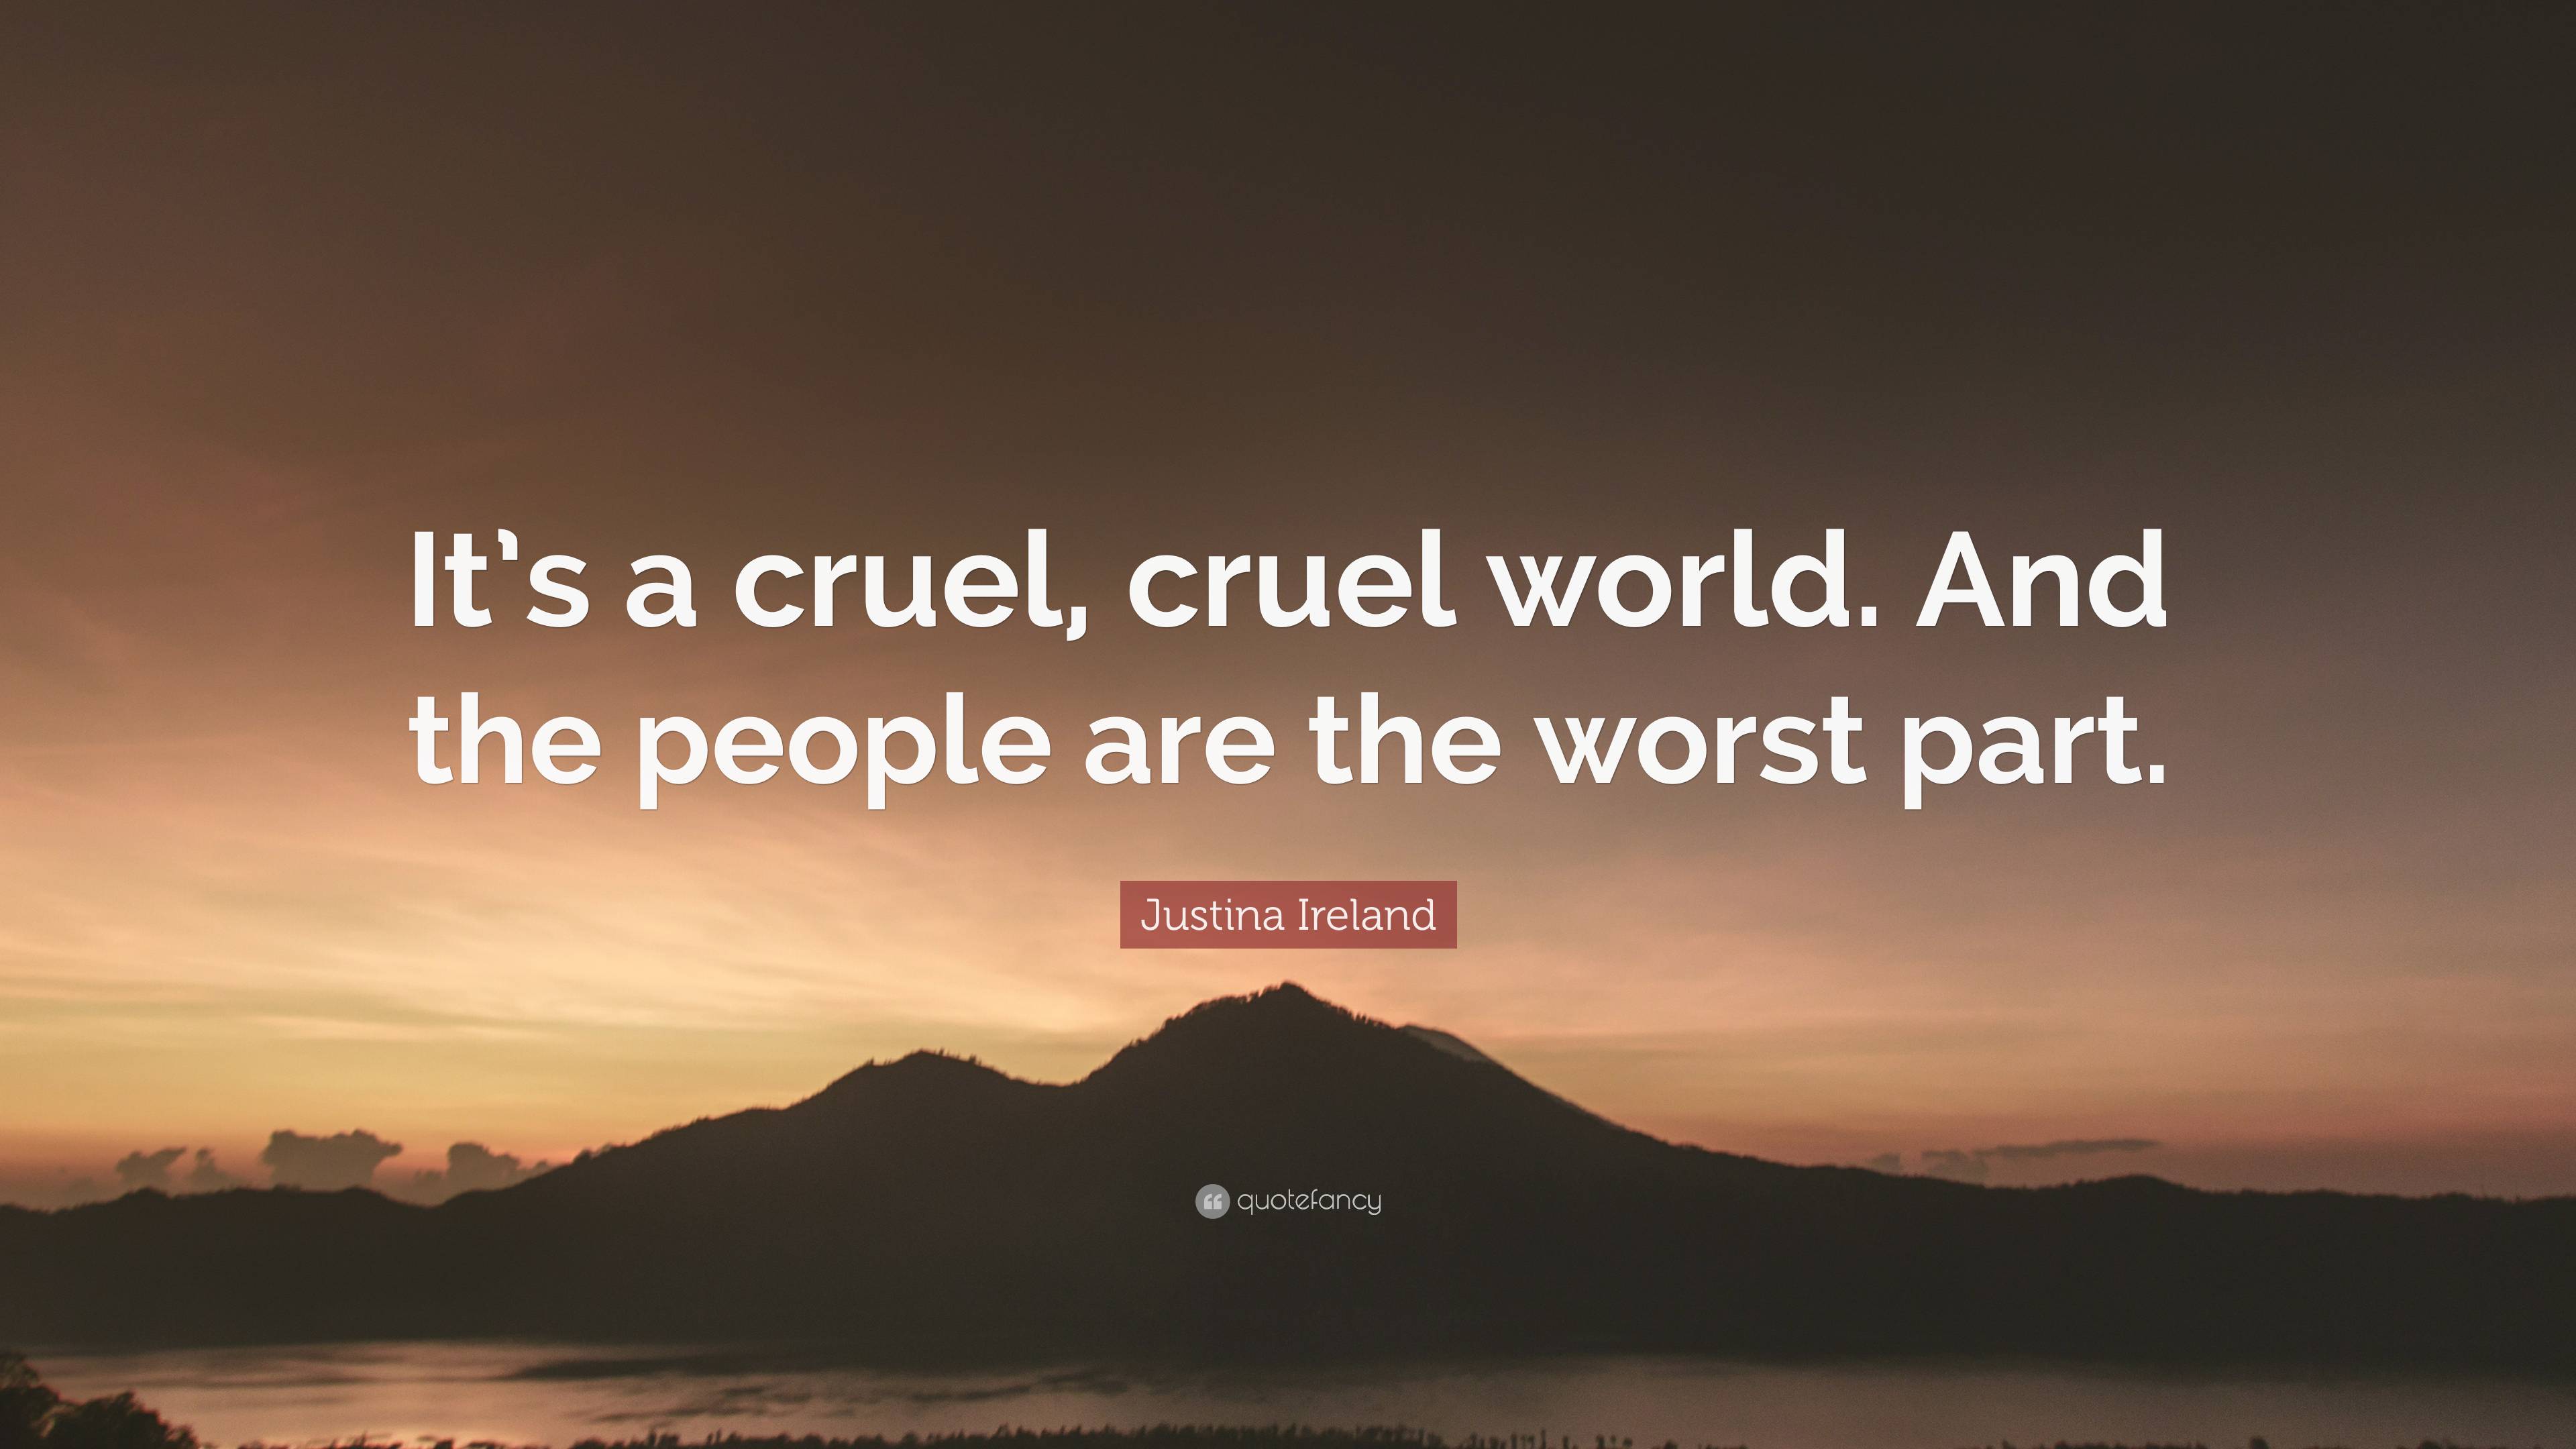 Justina Ireland Quote: “It's a cruel, cruel world. And the people